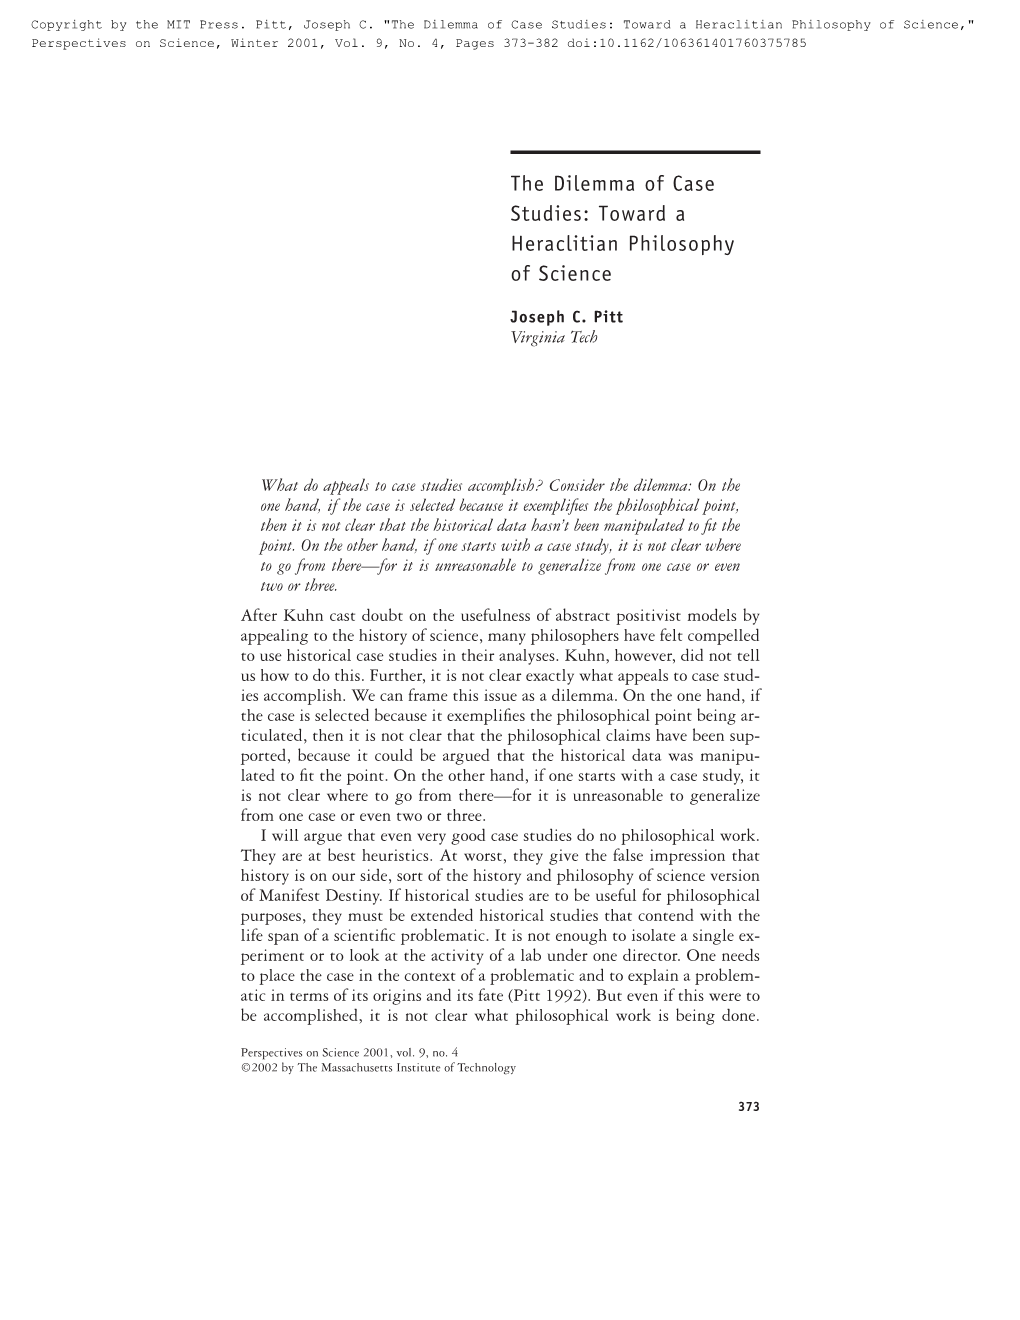 The Dilemma of Case Studies: Toward a Heraclitian Philosophy of Science